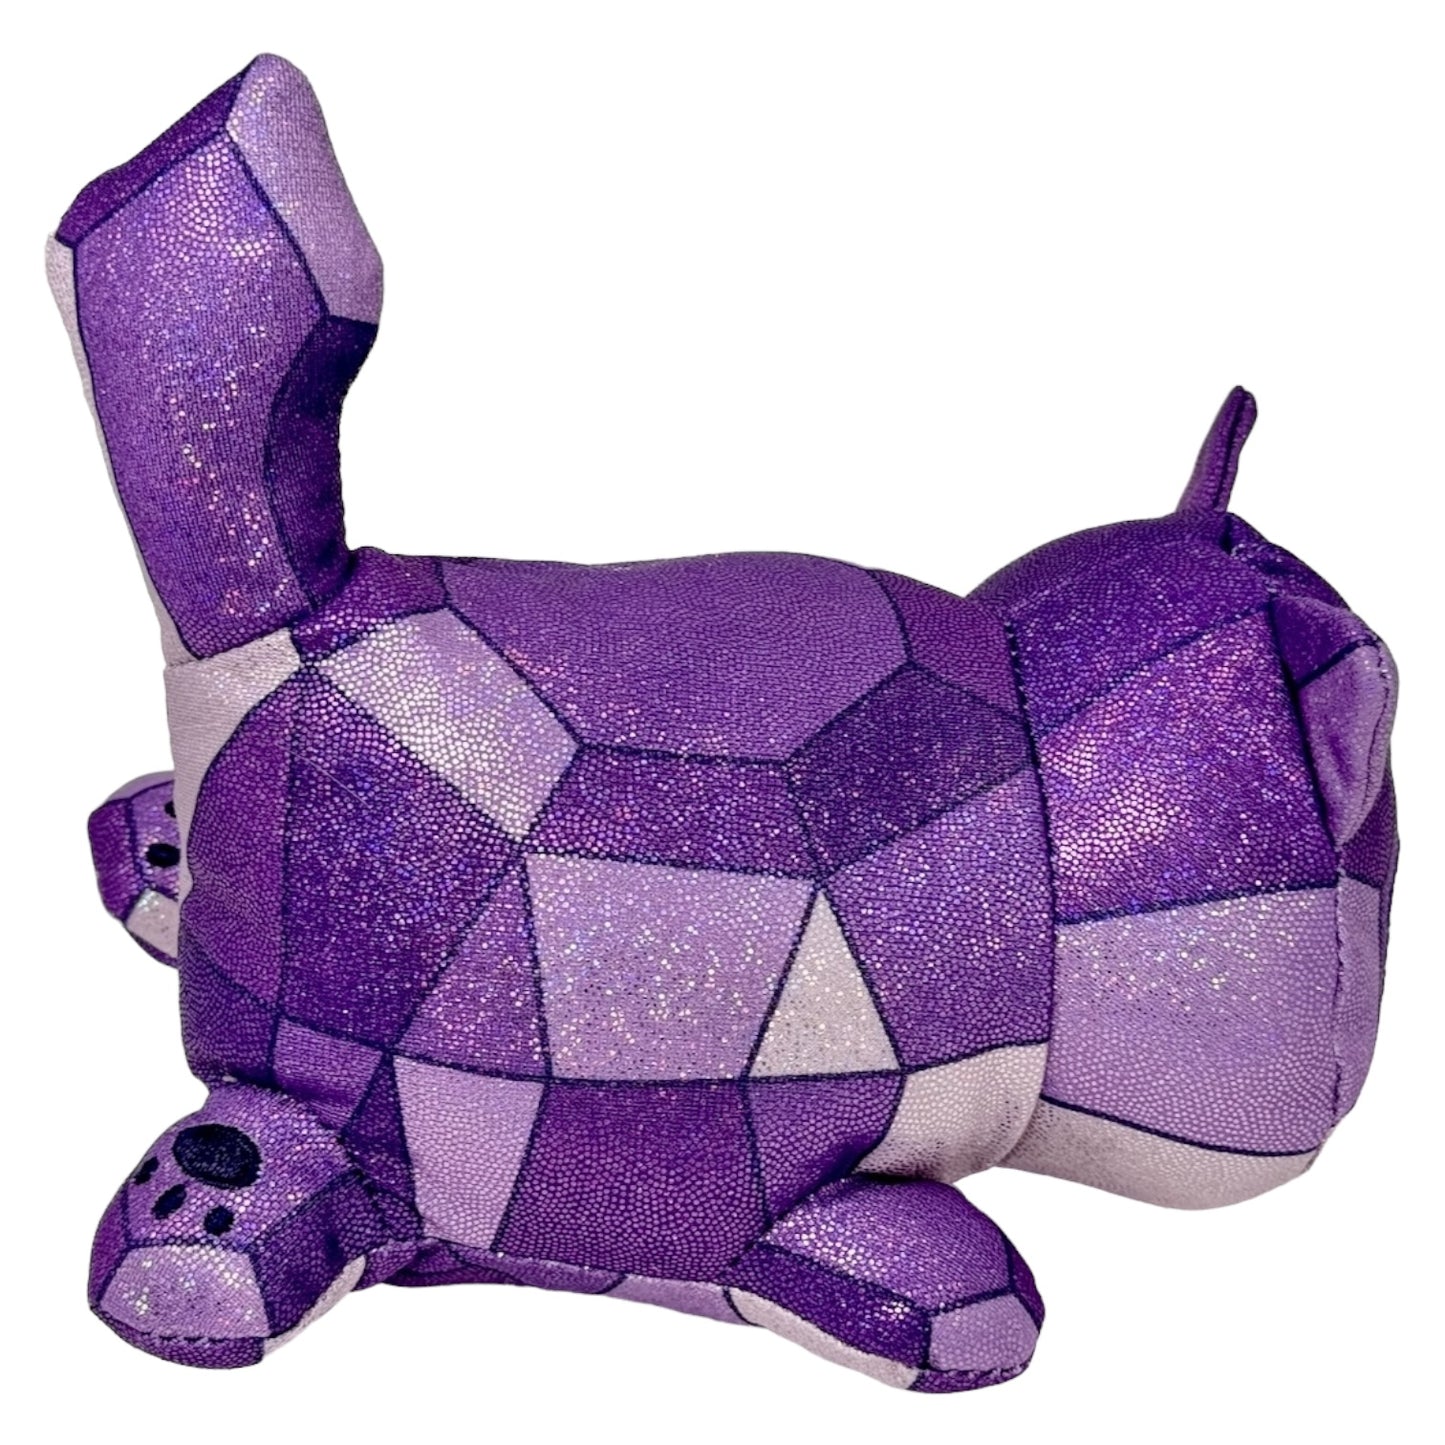 AMETHYST CAT - MeeMeows Litter 4 from Aphmau (BRAND NEW) HTF Claire's Exclusive!